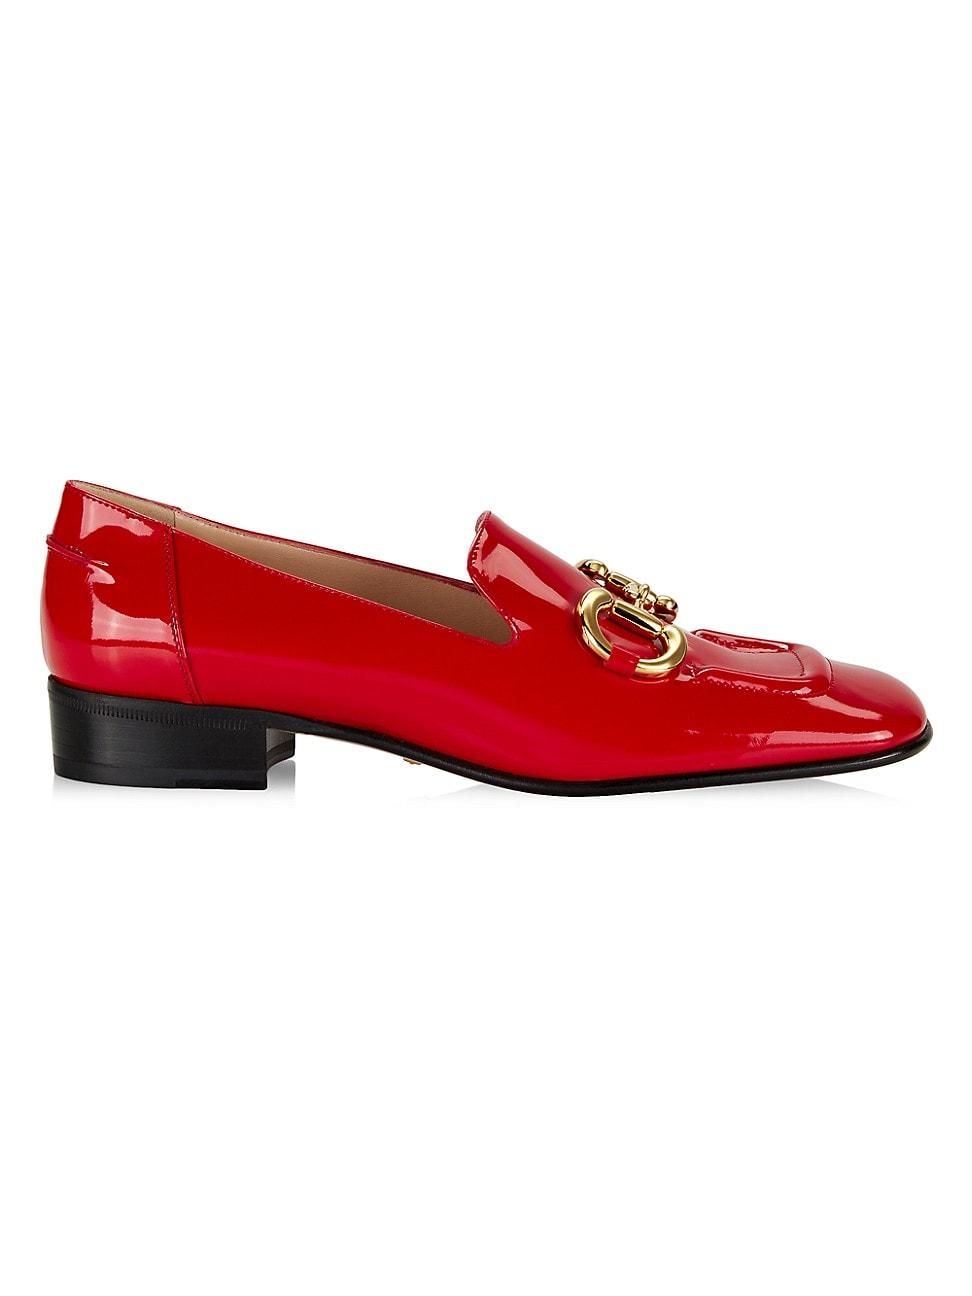 Gucci Patent Leather Buckle Loafers in Red | Lyst